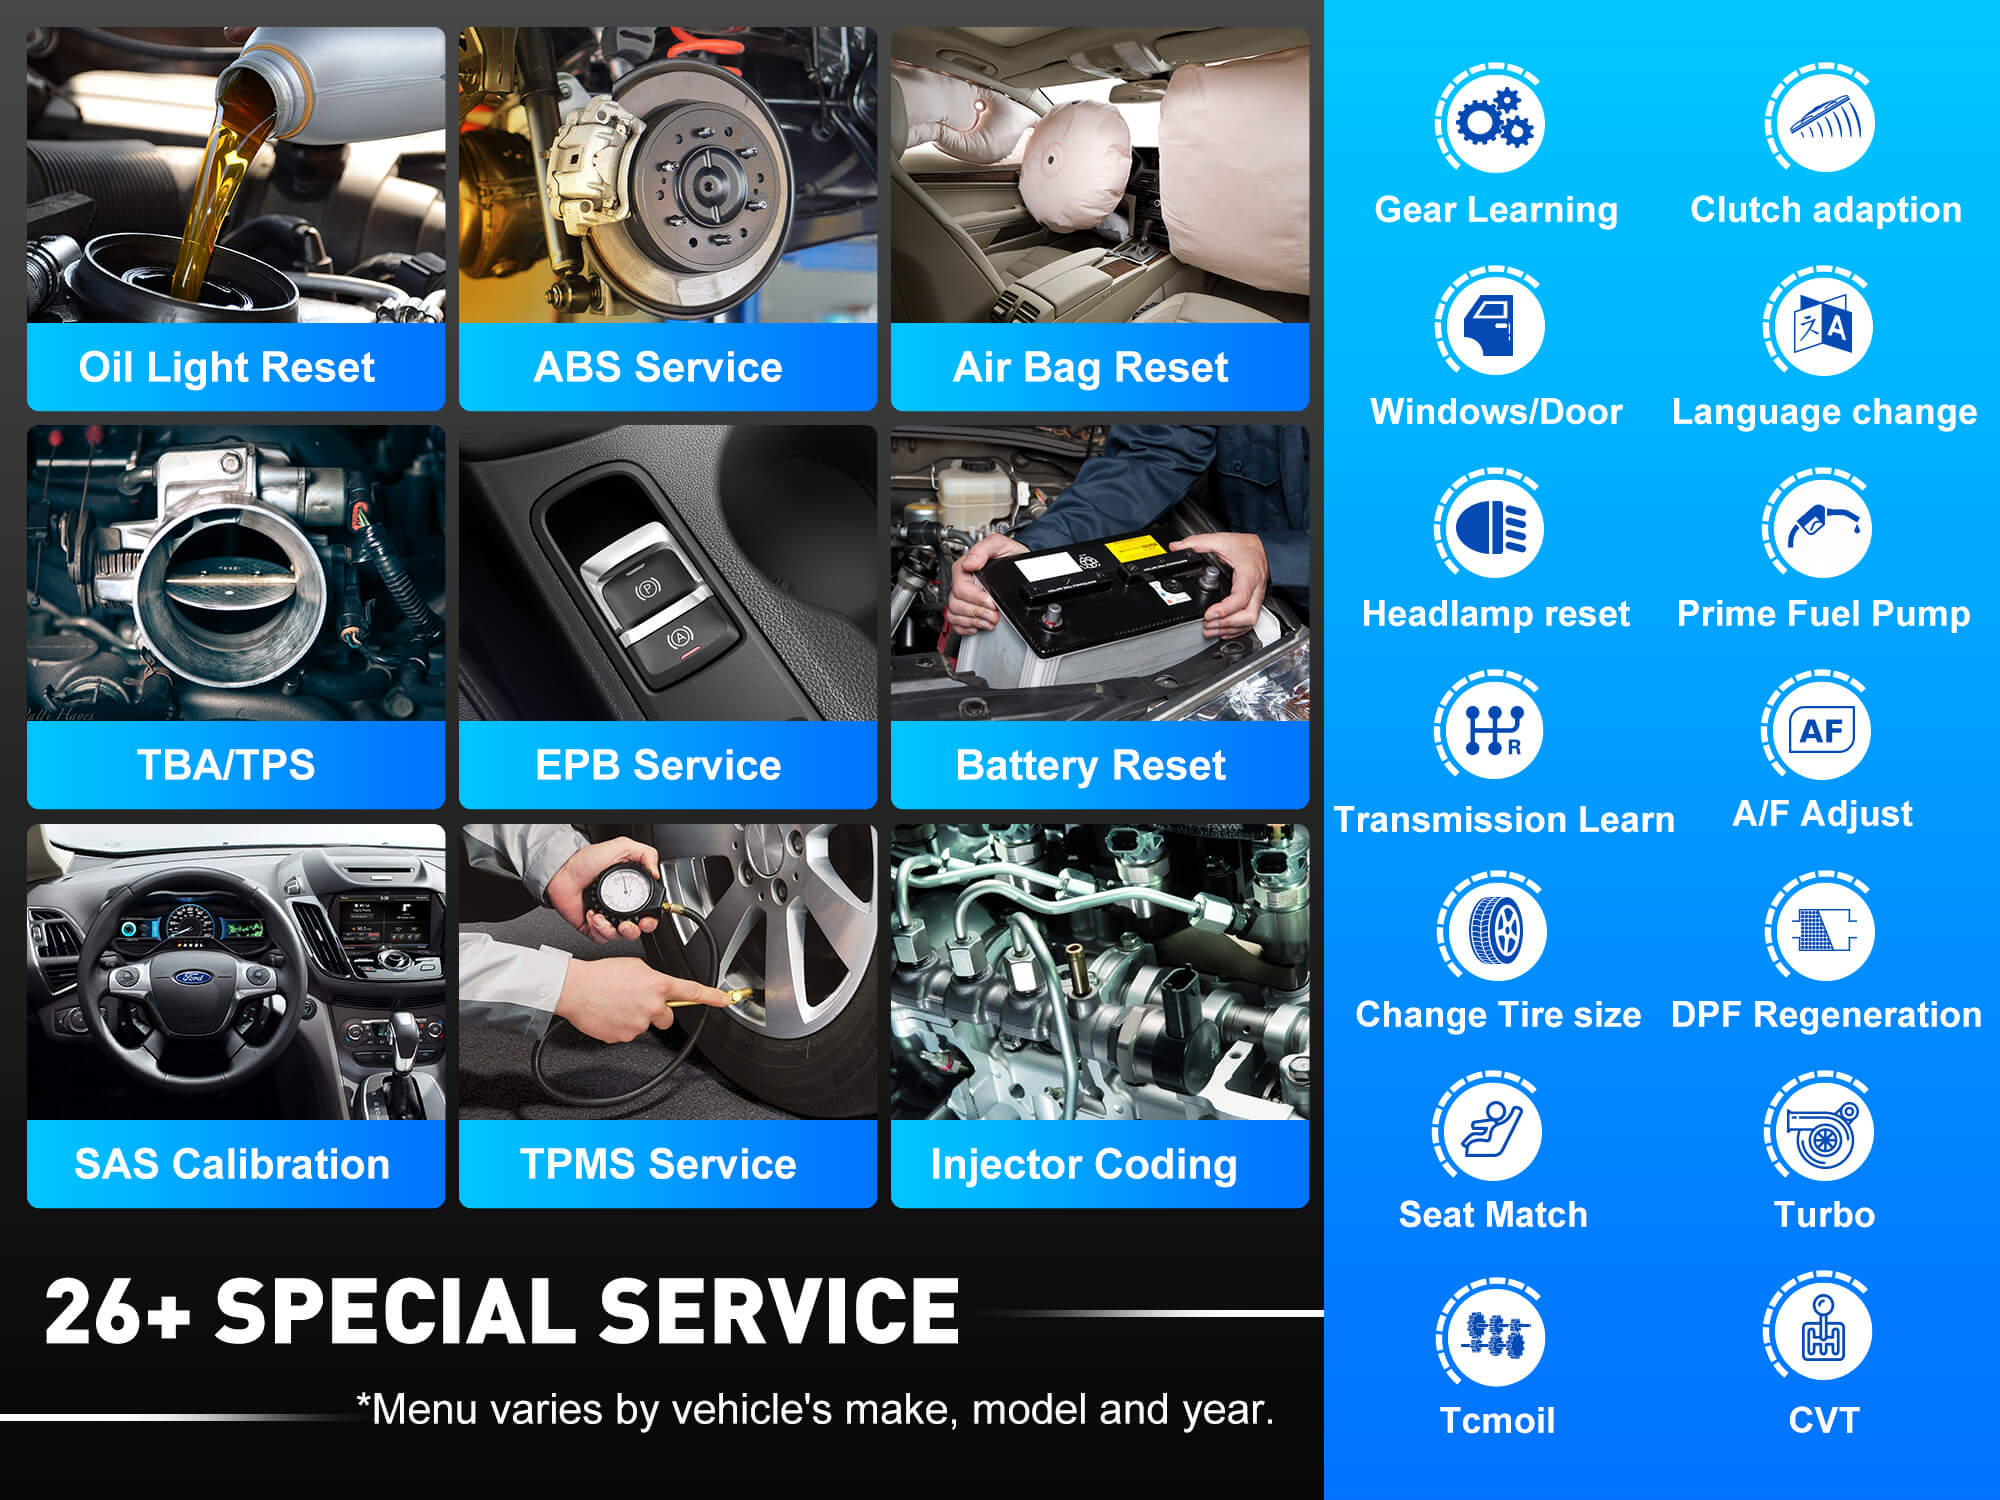 CGSULIT SC530 Ford/LincoIn/Mercury Scan Tool has 26+ special functions. Get your service done efficiently and effortlessly. It performs oil light reset, abs bleeding, air bag reset, TBA/TPS, EPB service, battery reset, sas calibration, TPMS service, injector coding and more functions.